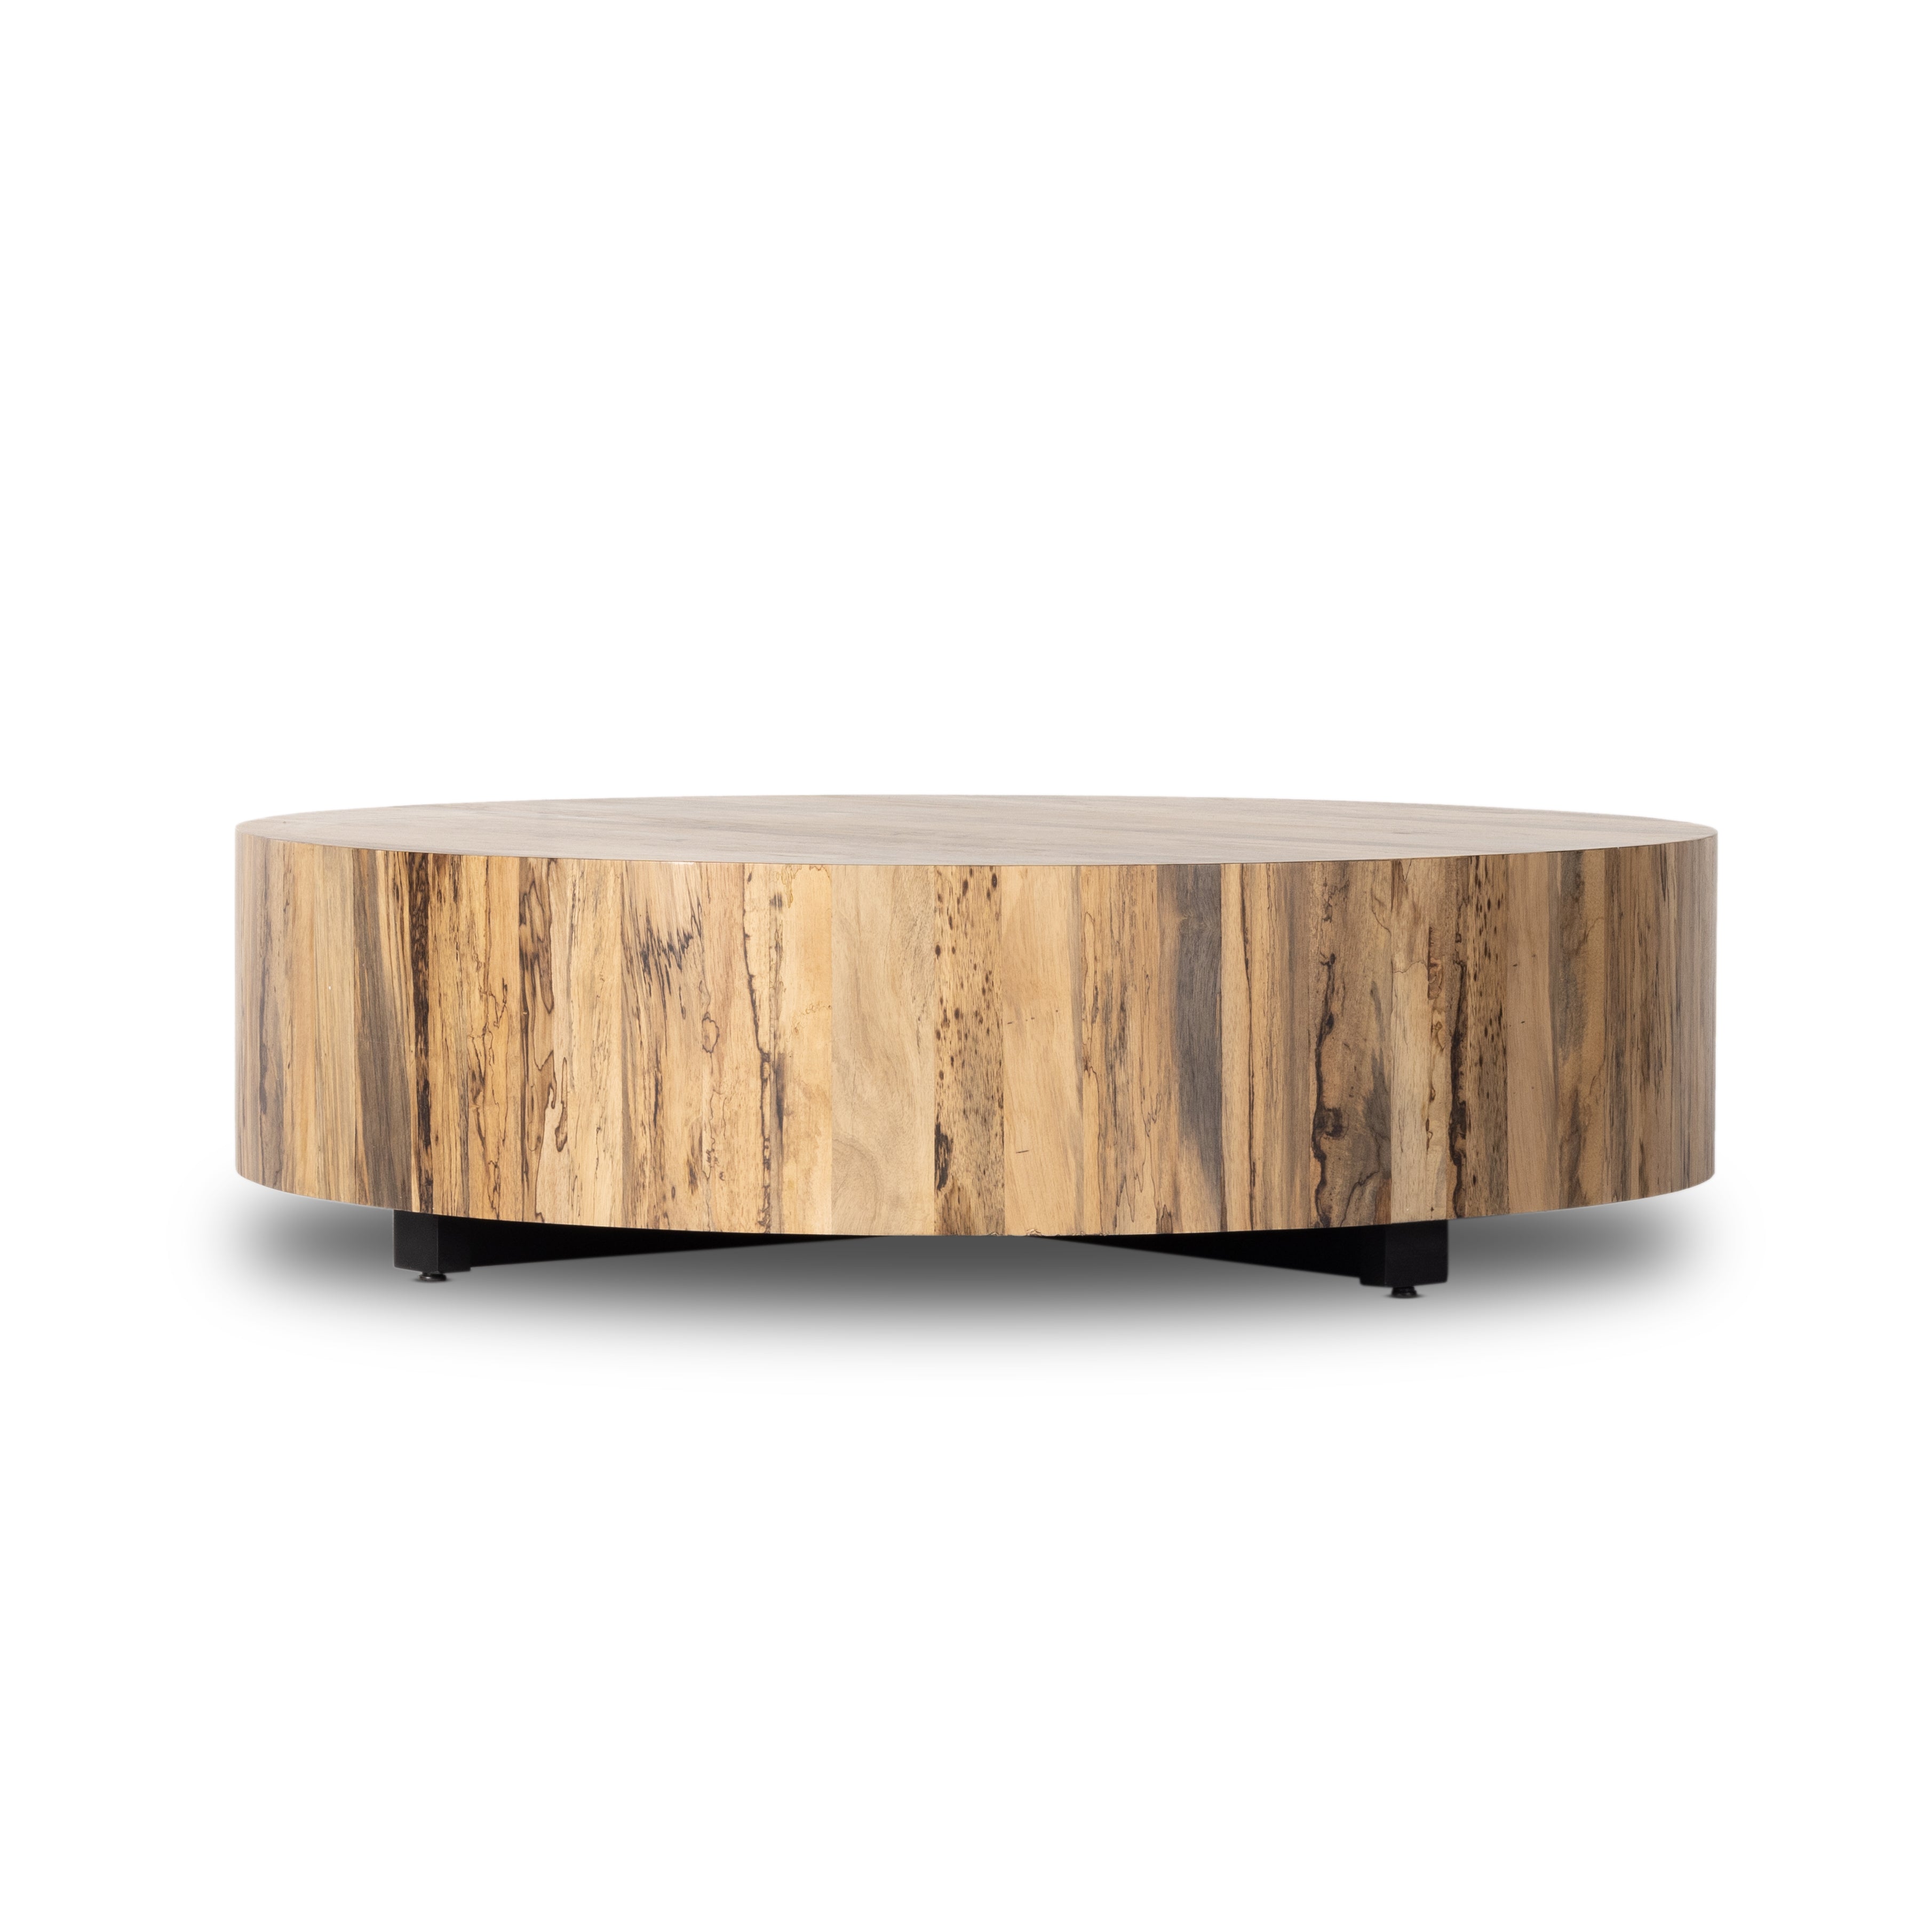 Stunning forces of nature are captured in a coffee table, as spalted primavera wood is hand-shaped into a cylindrical silhouette. Reflective of woods' natural character, a slight color variance is possible. Amethyst Home provides interior design, new construction, custom furniture, and area rugs in the Monterey metro area.